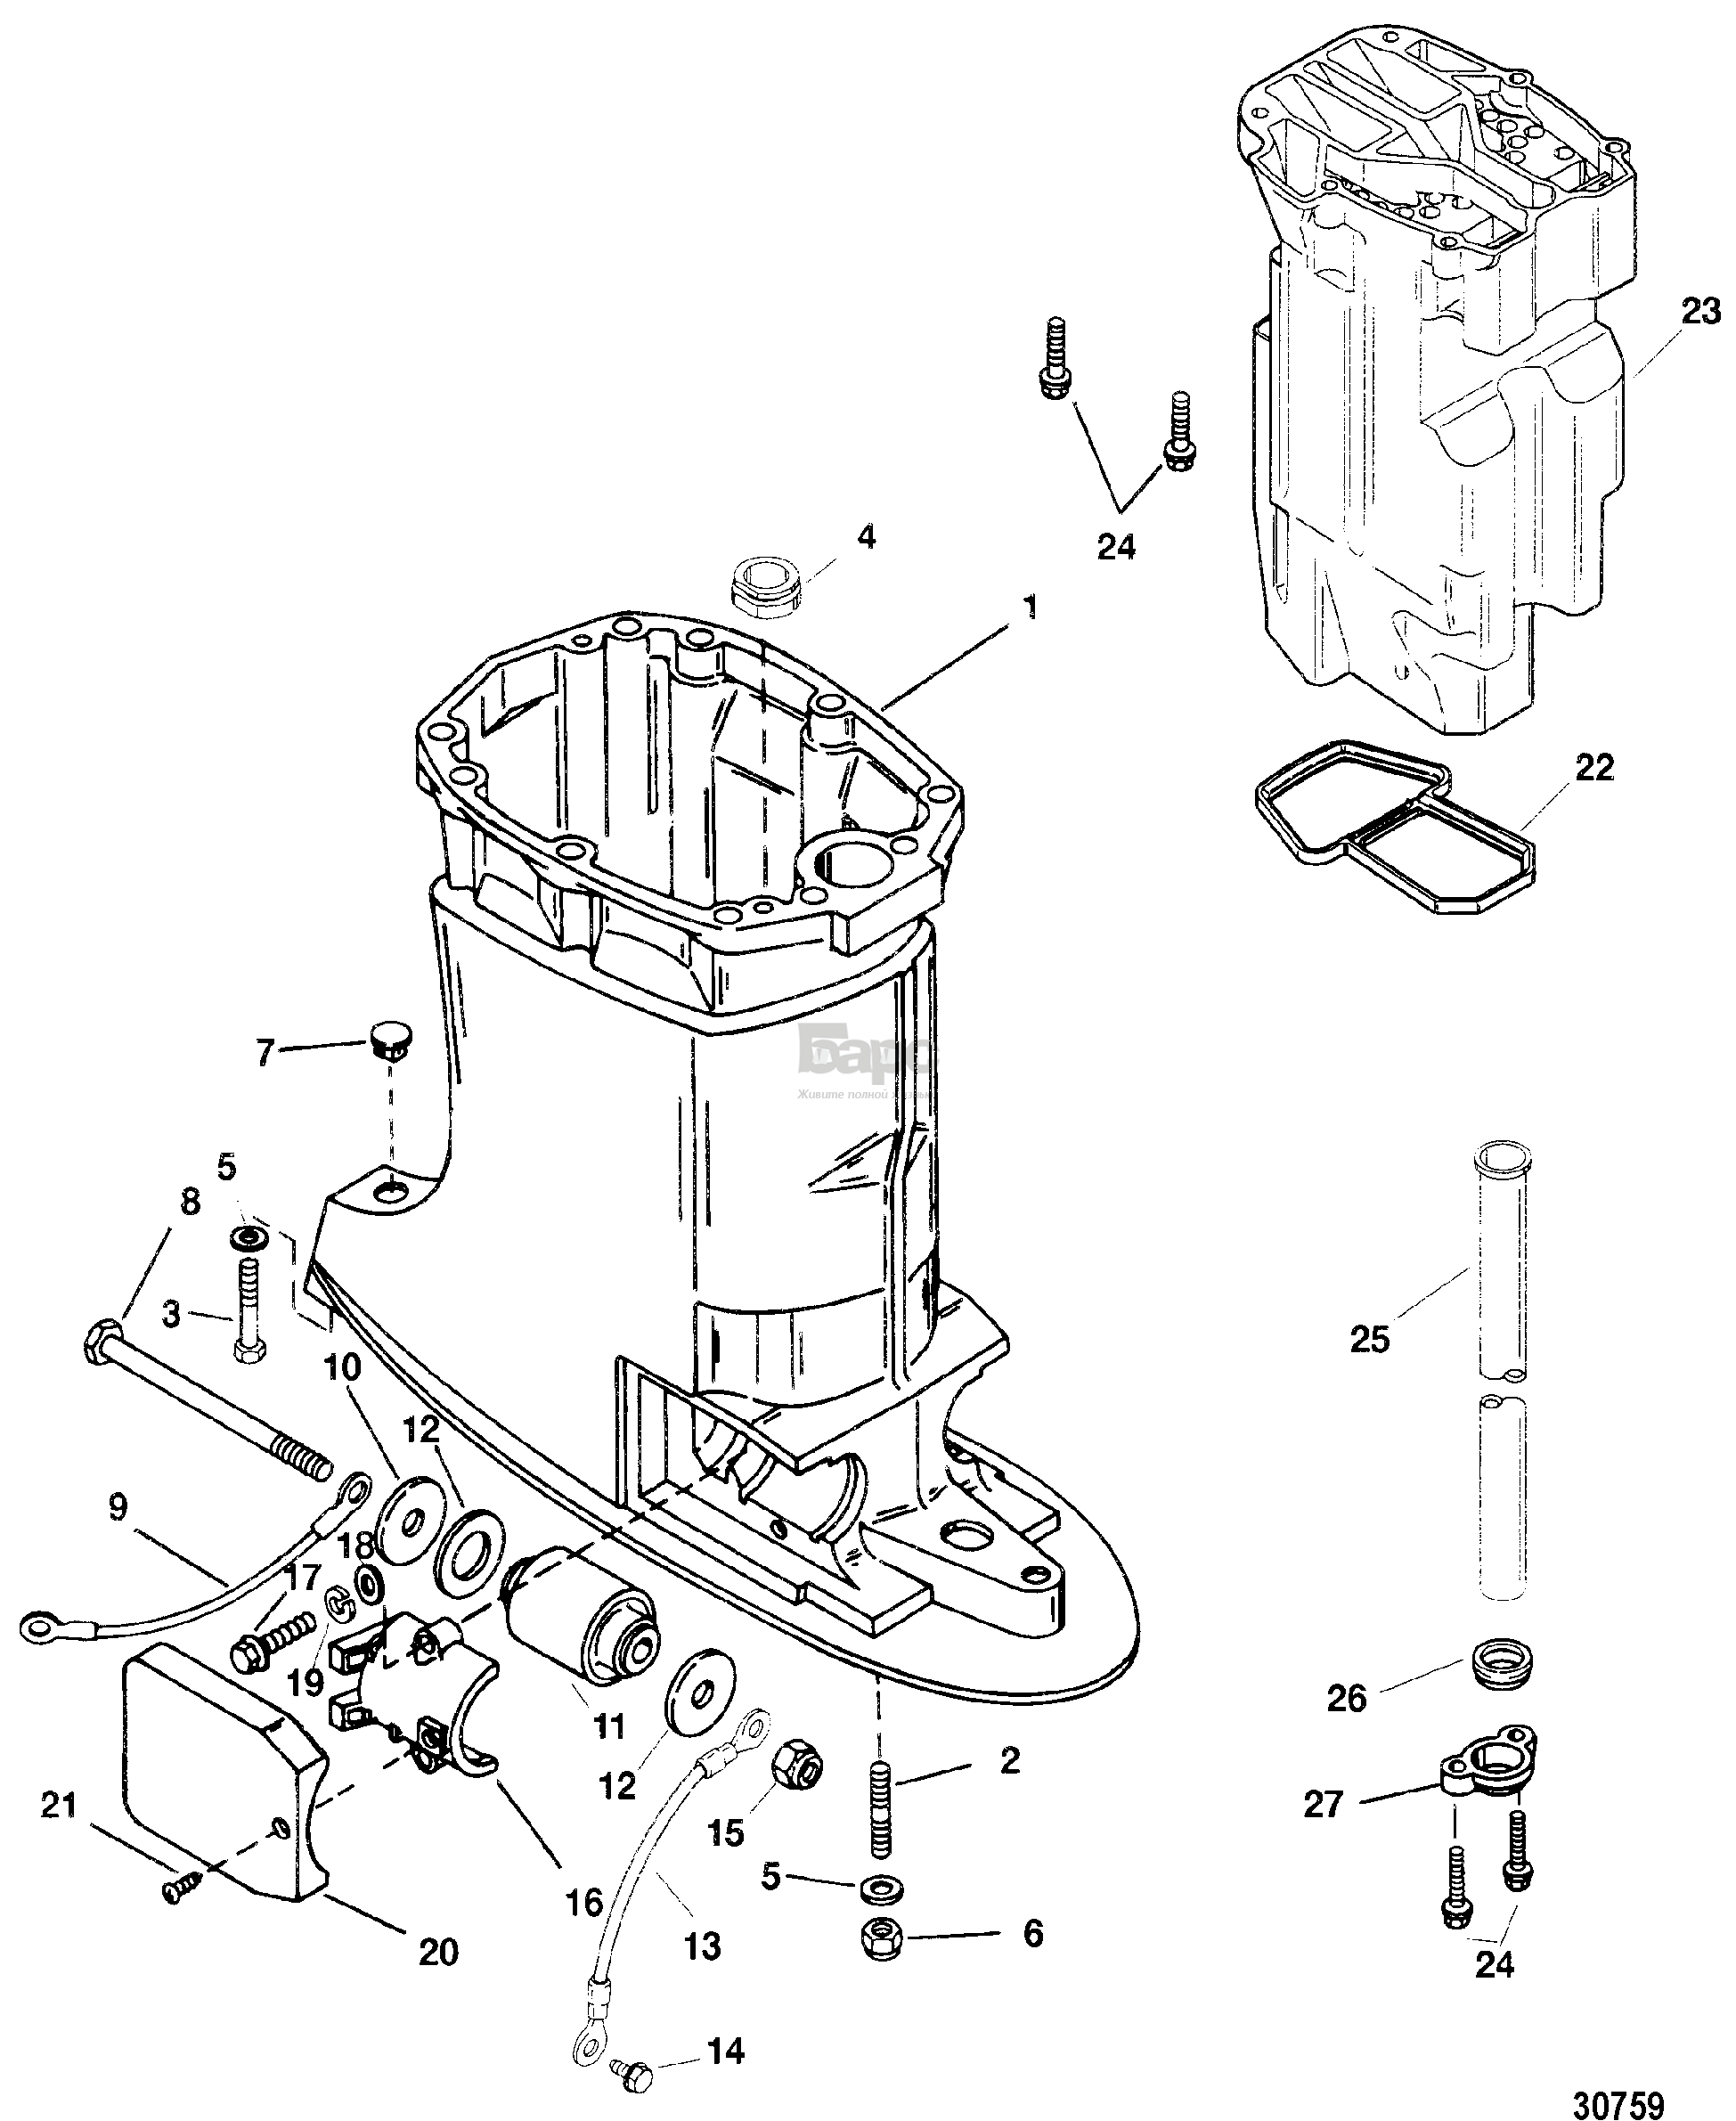 DRIVESHAFT HOUSING AND EXHAUST TUBE